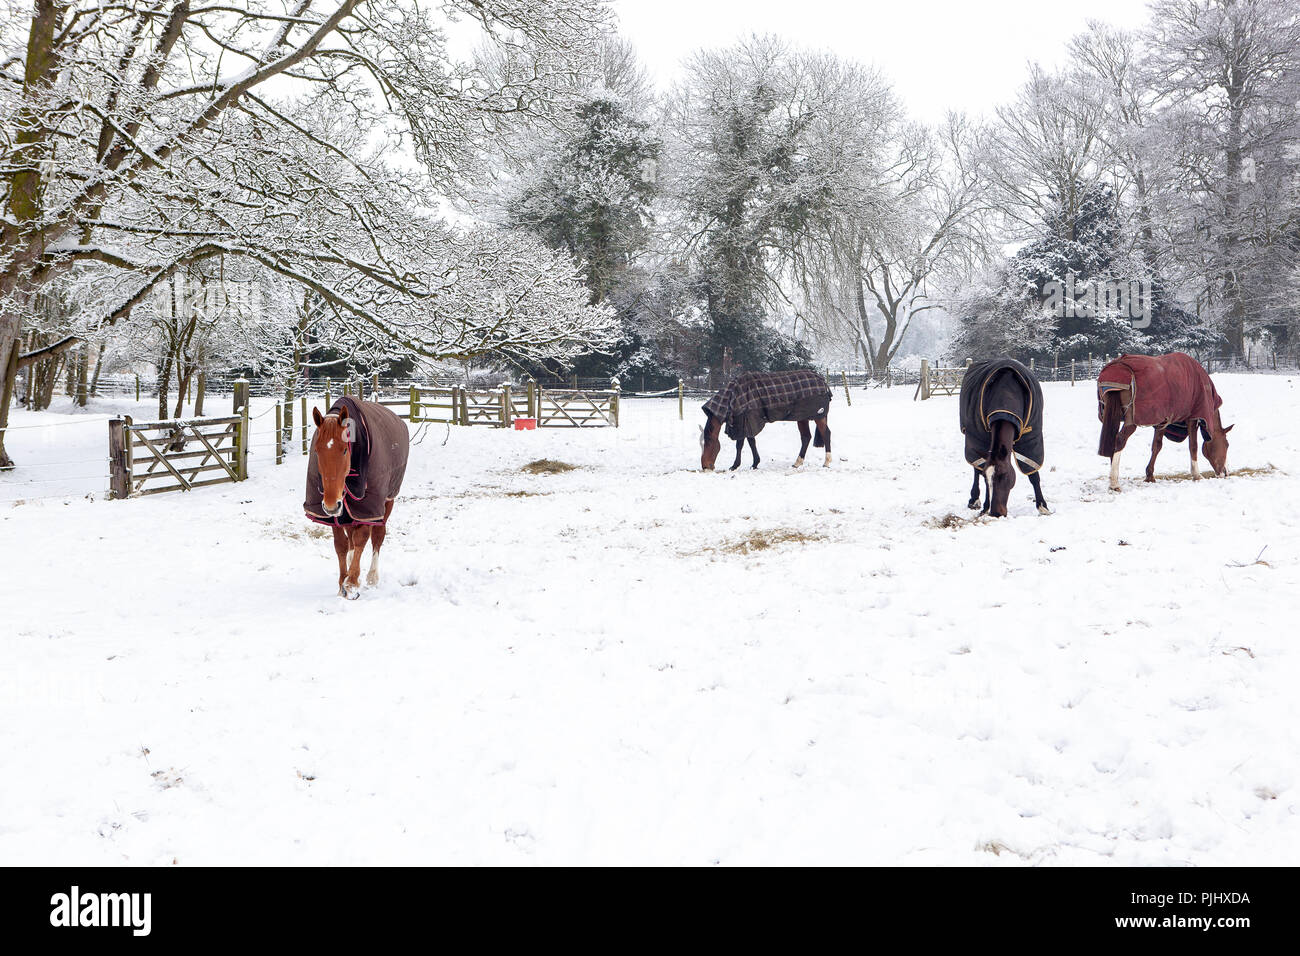 Horses with Winter Coats in Snow Covered Paddock Winter Landscape Uk Stock Photo